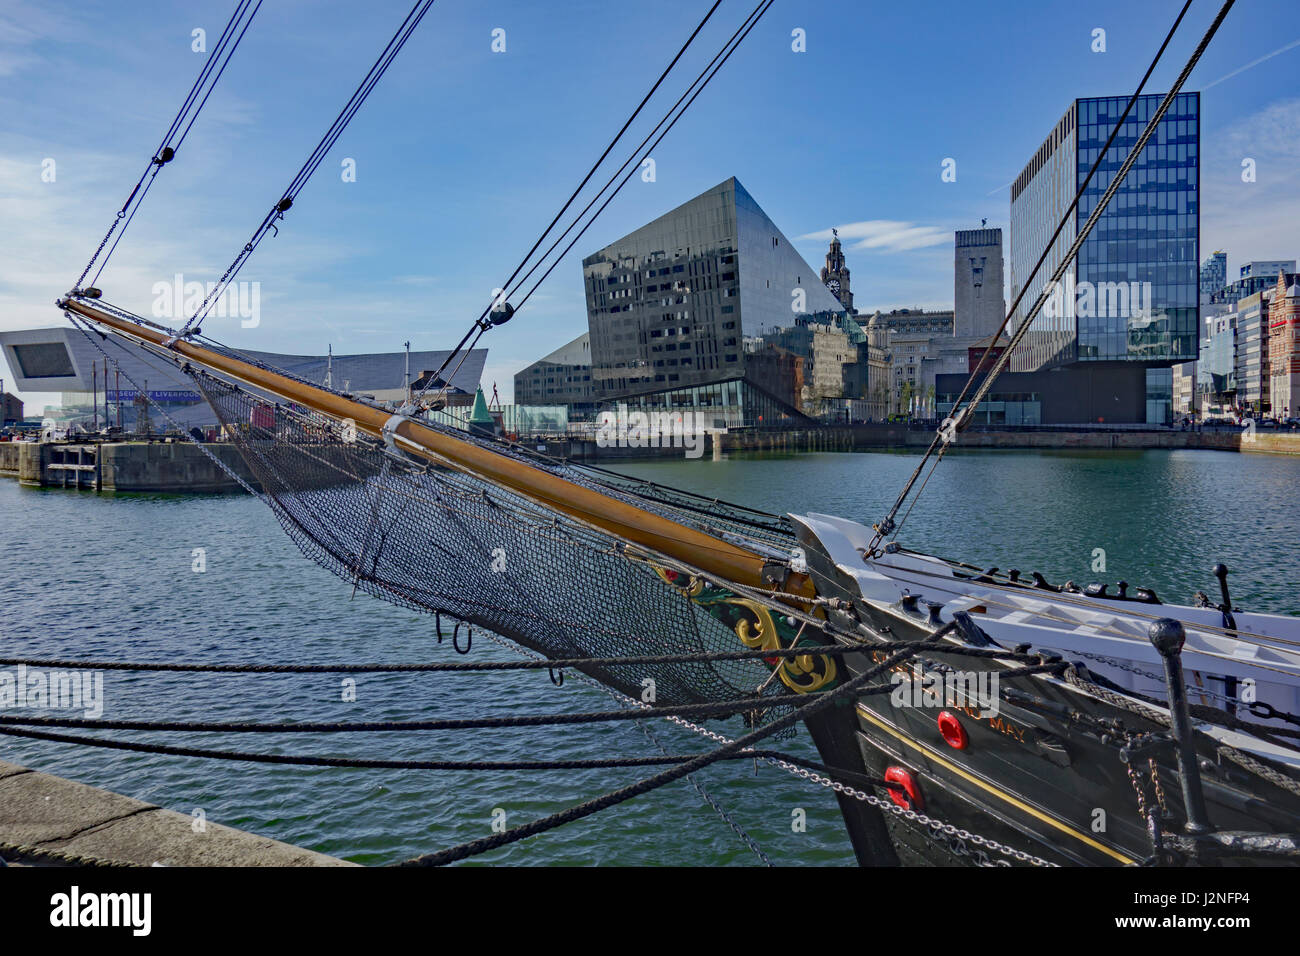 View across Canning Dock, Liverpool, with old sailing ship in foreground. Stock Photo